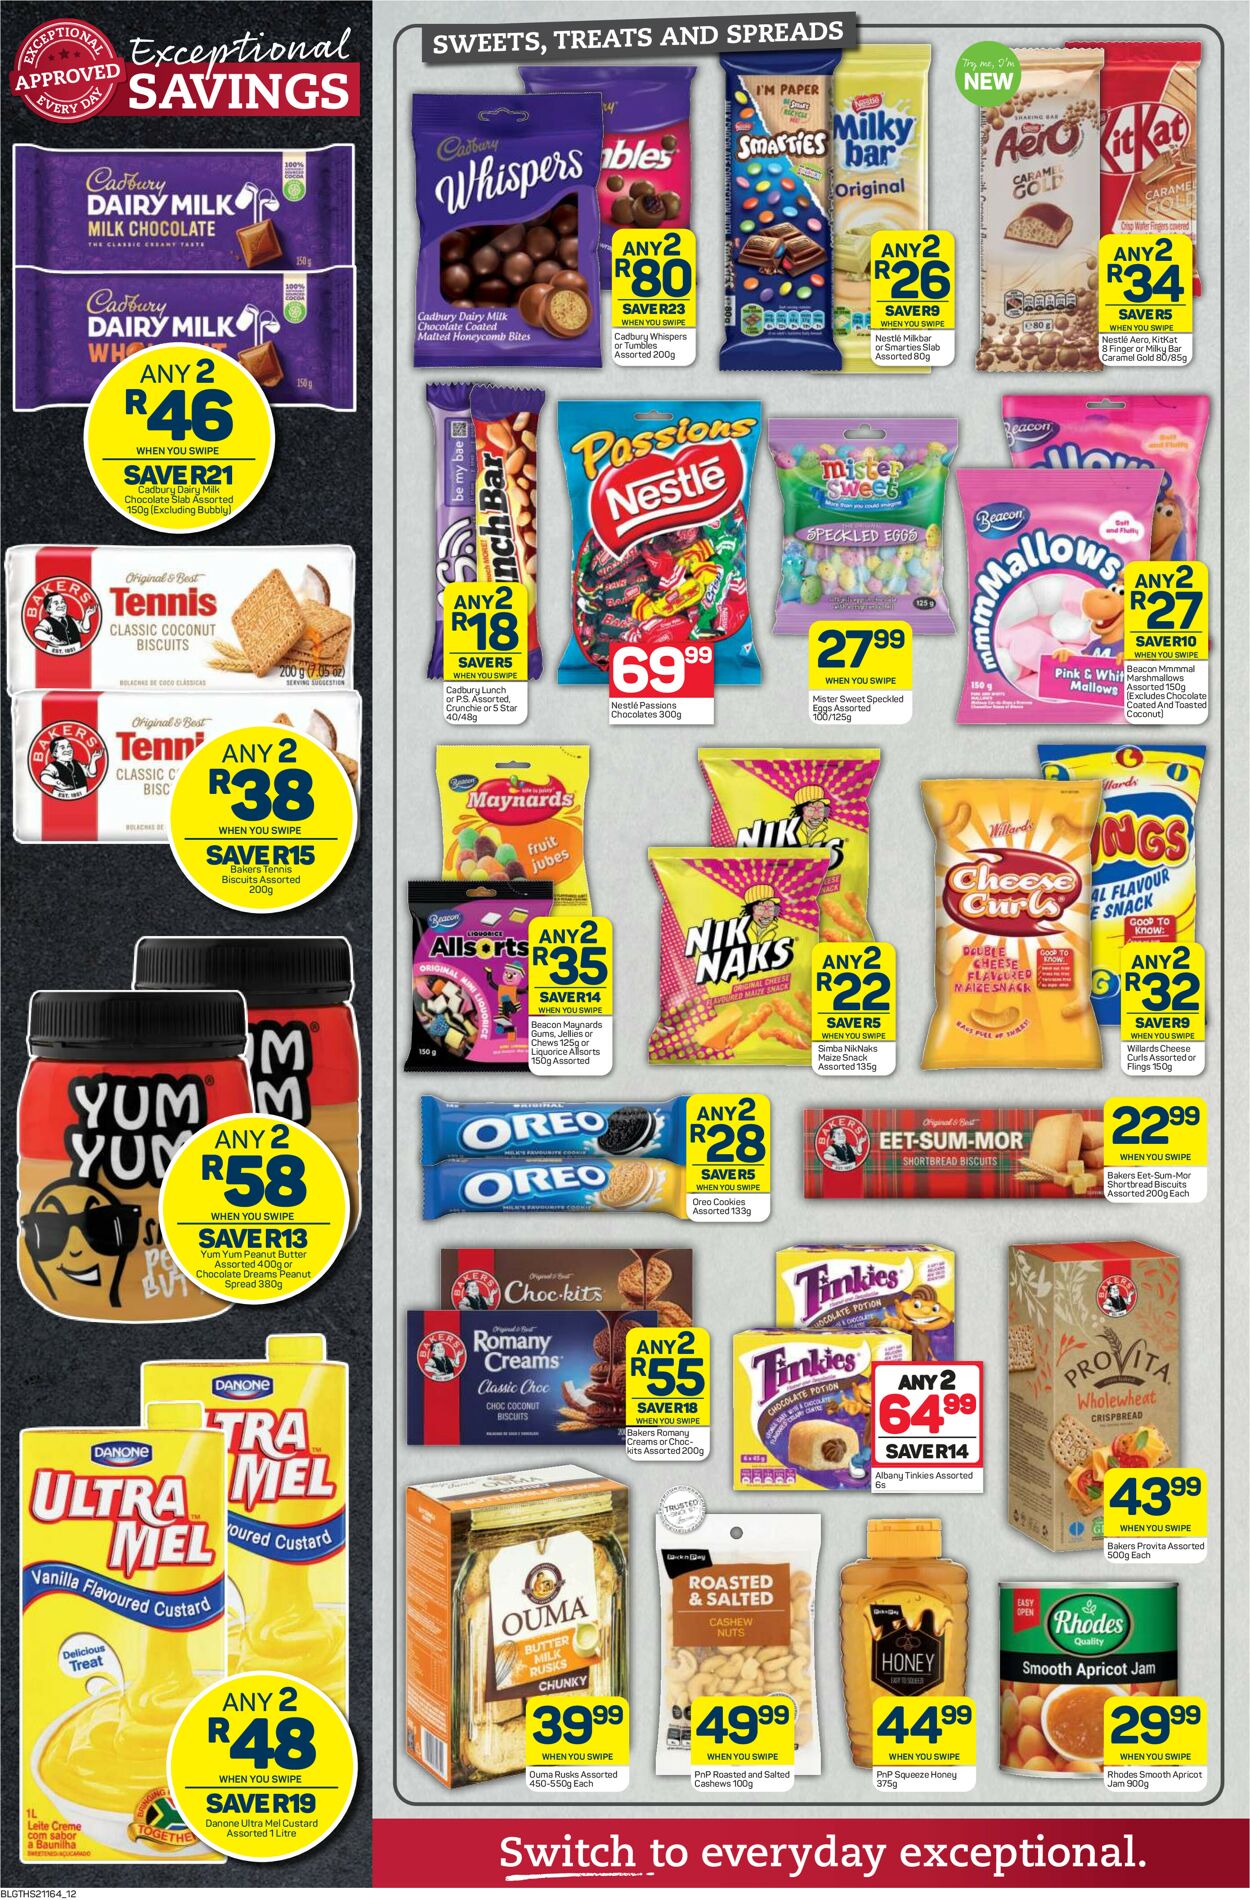 Pick n Pay Catalogue - 2022/10/24-2022/11/06 (Page 12)